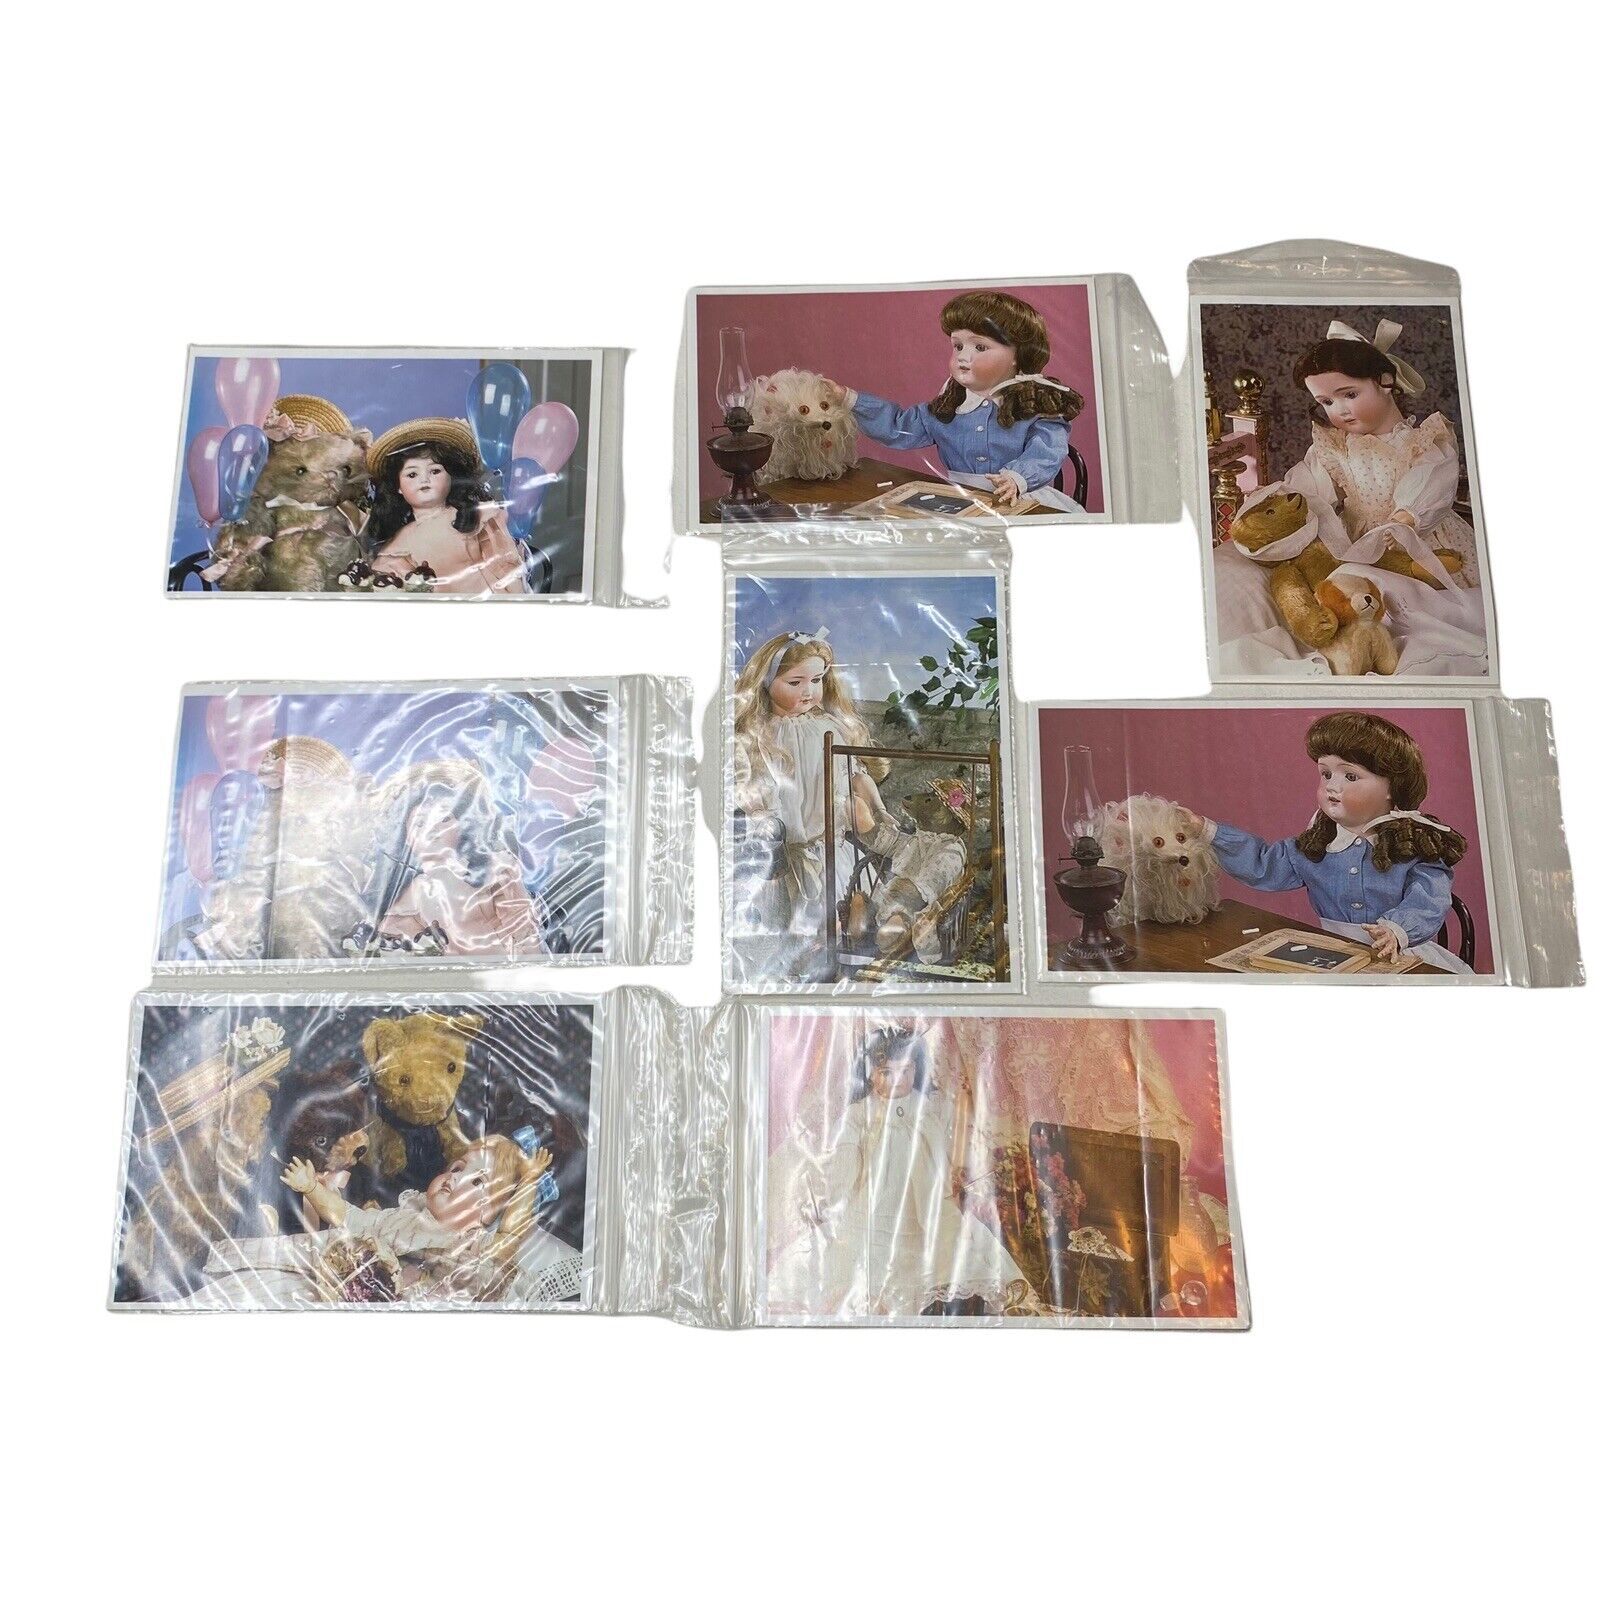 House of White Birches Vintage Doll Postcards New in Ziploc Bags 8